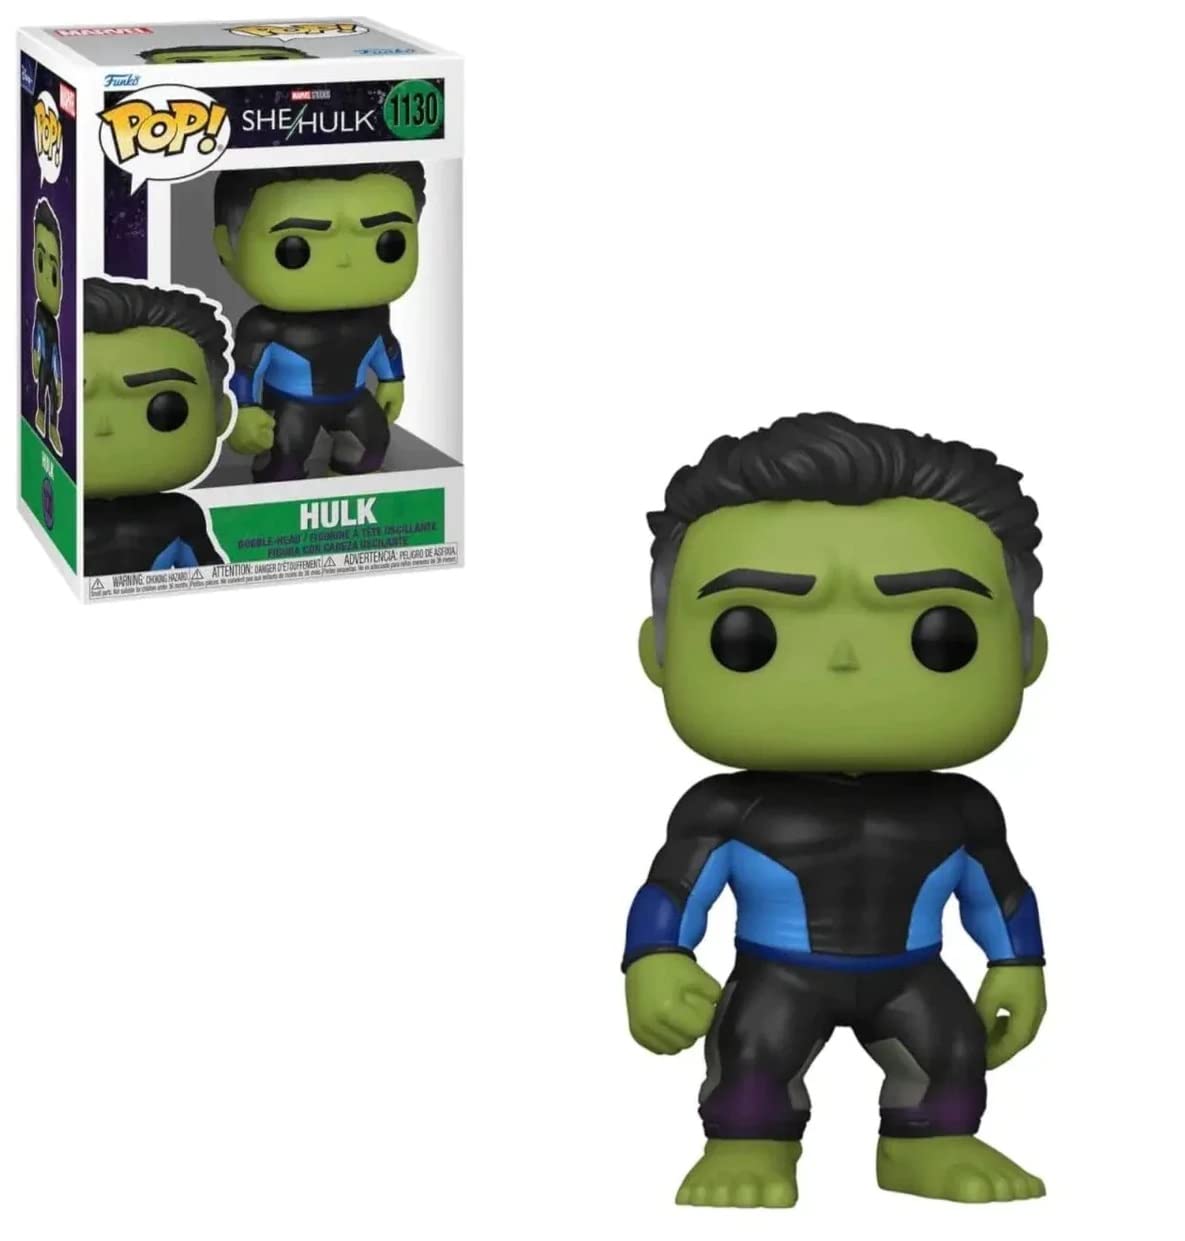 POP Marvel: [She Hulk] Attorney at Law - Smart Hulk Funko Vinyl Figure (Bundled with Compatible Box Protector Case), Multicolor, 3.75 inches